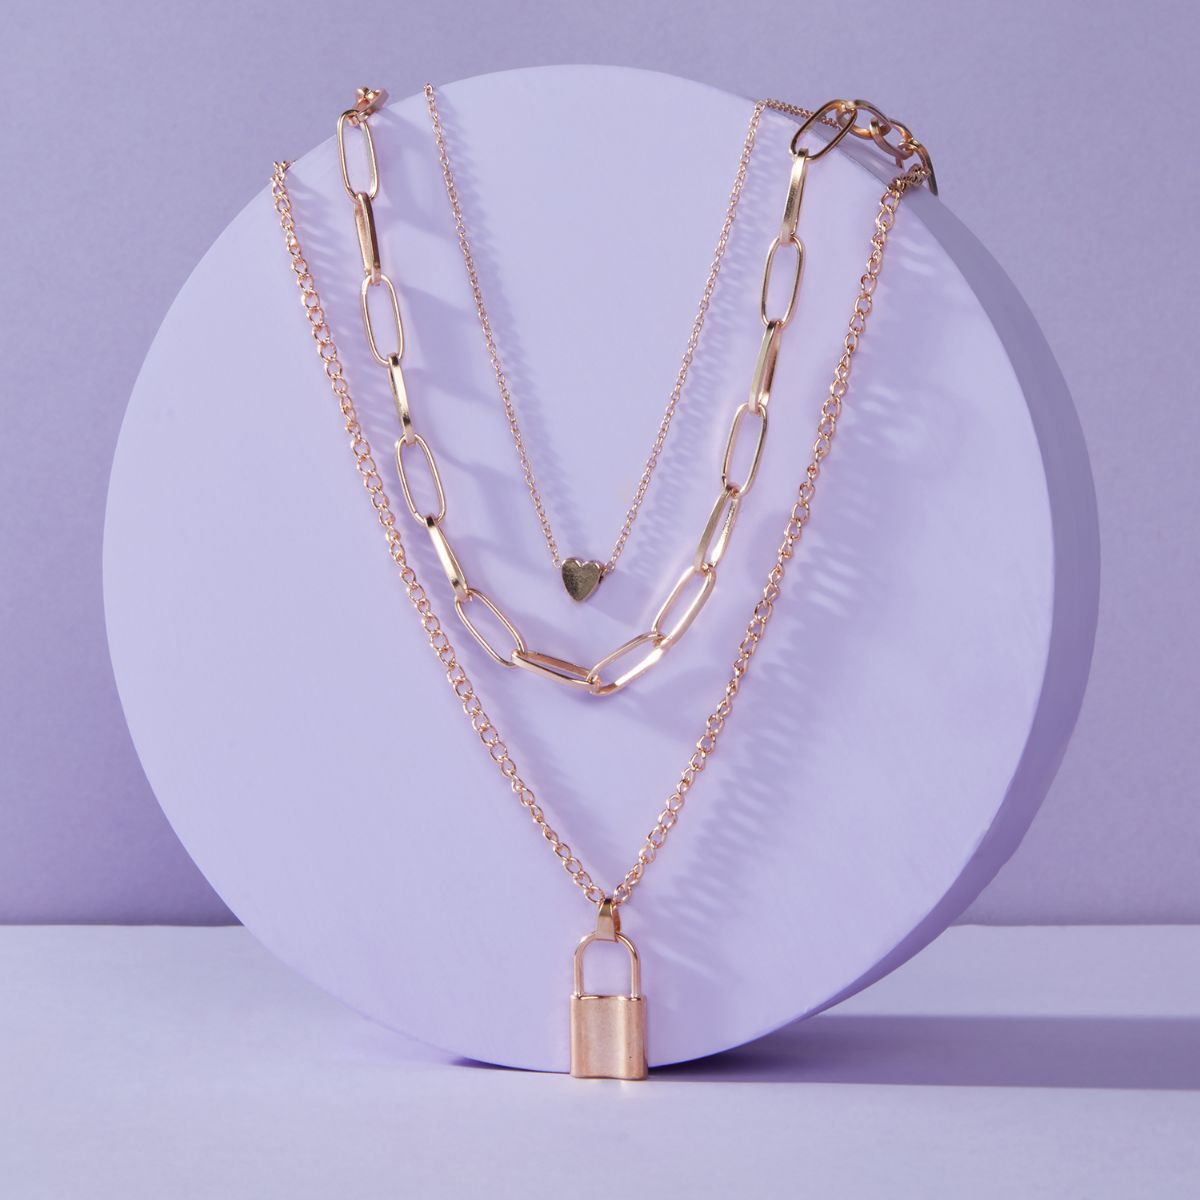 Pipa Bella by Nykaa Fashion Gold Plated Layered Padlock Pendant Link Chain Necklace